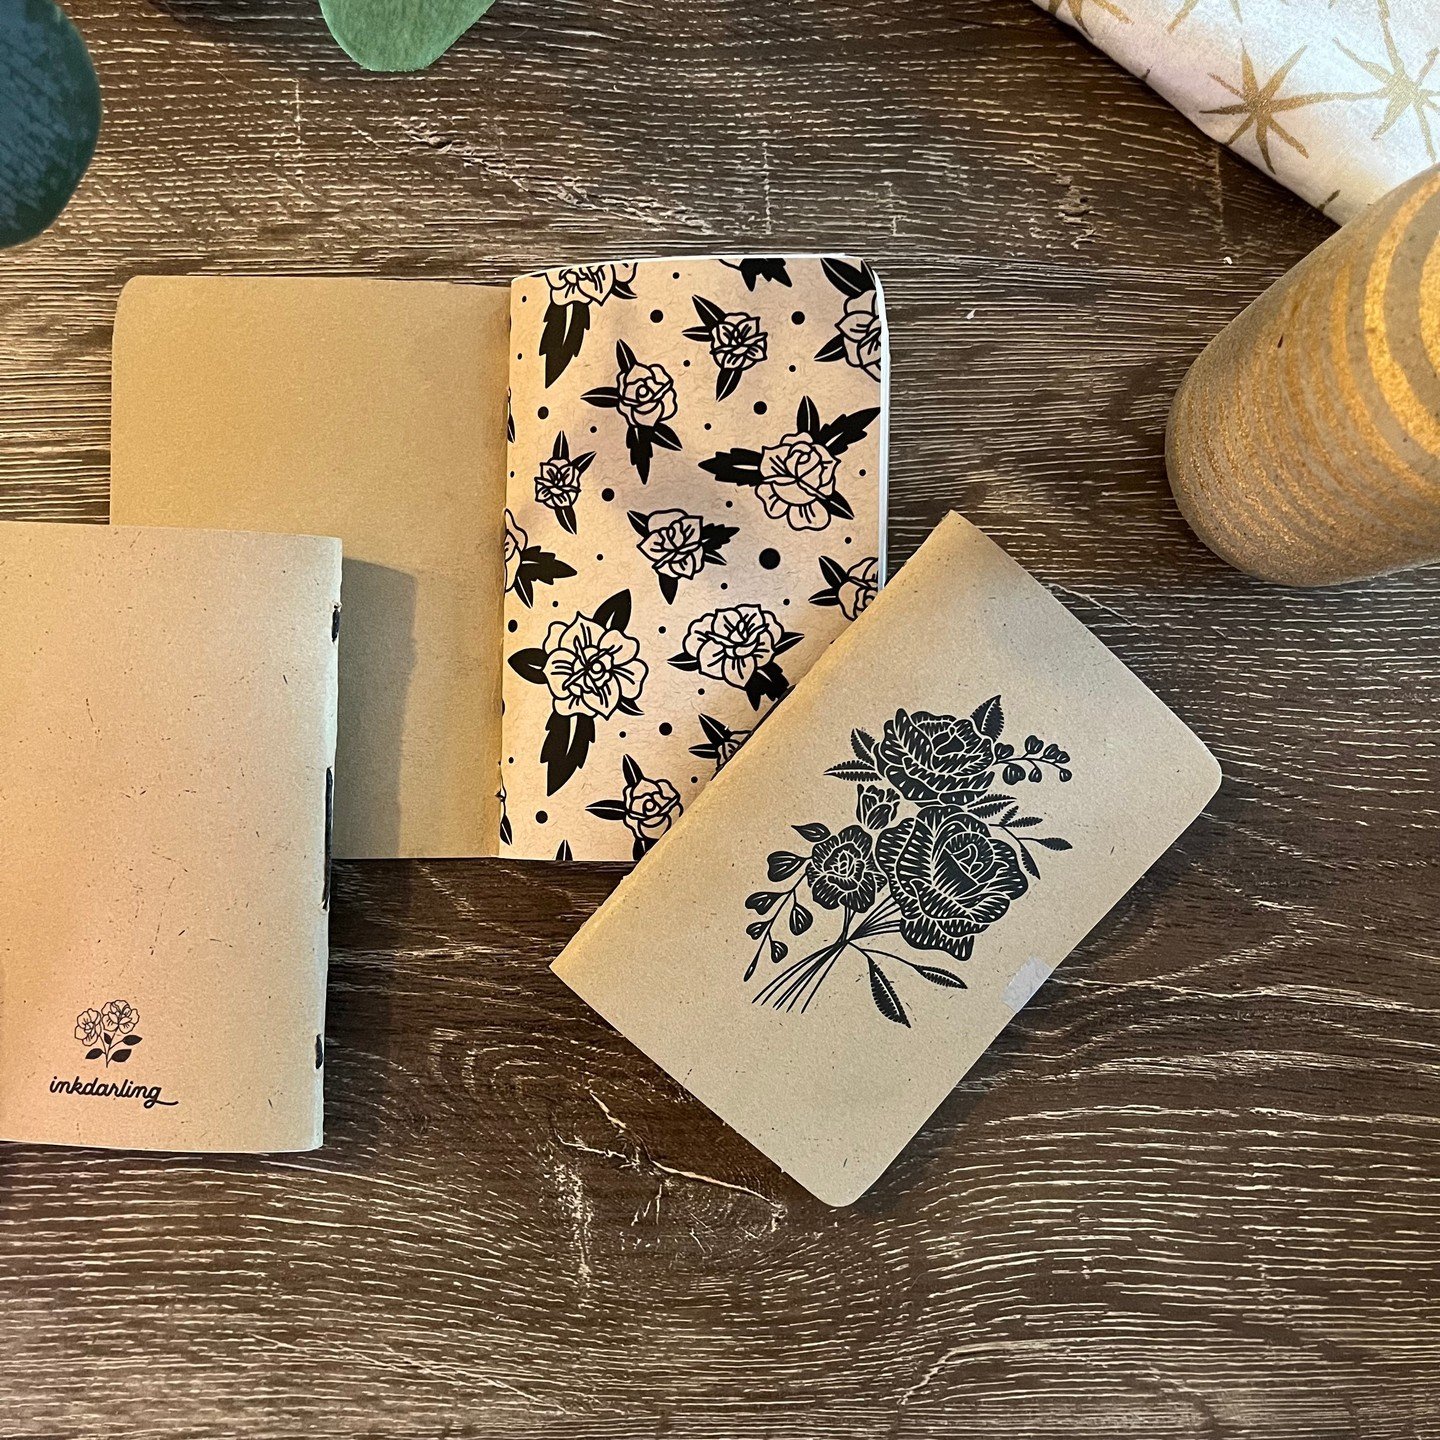 Made from home. Made with love.

Inspired by linocut printmaking and traditional tattoos, this lil sketchbook is decorated with intricately designed roses. Measuring 3.5 x 5.25 inches, this companion piece is made with high-quality sketch paper and a